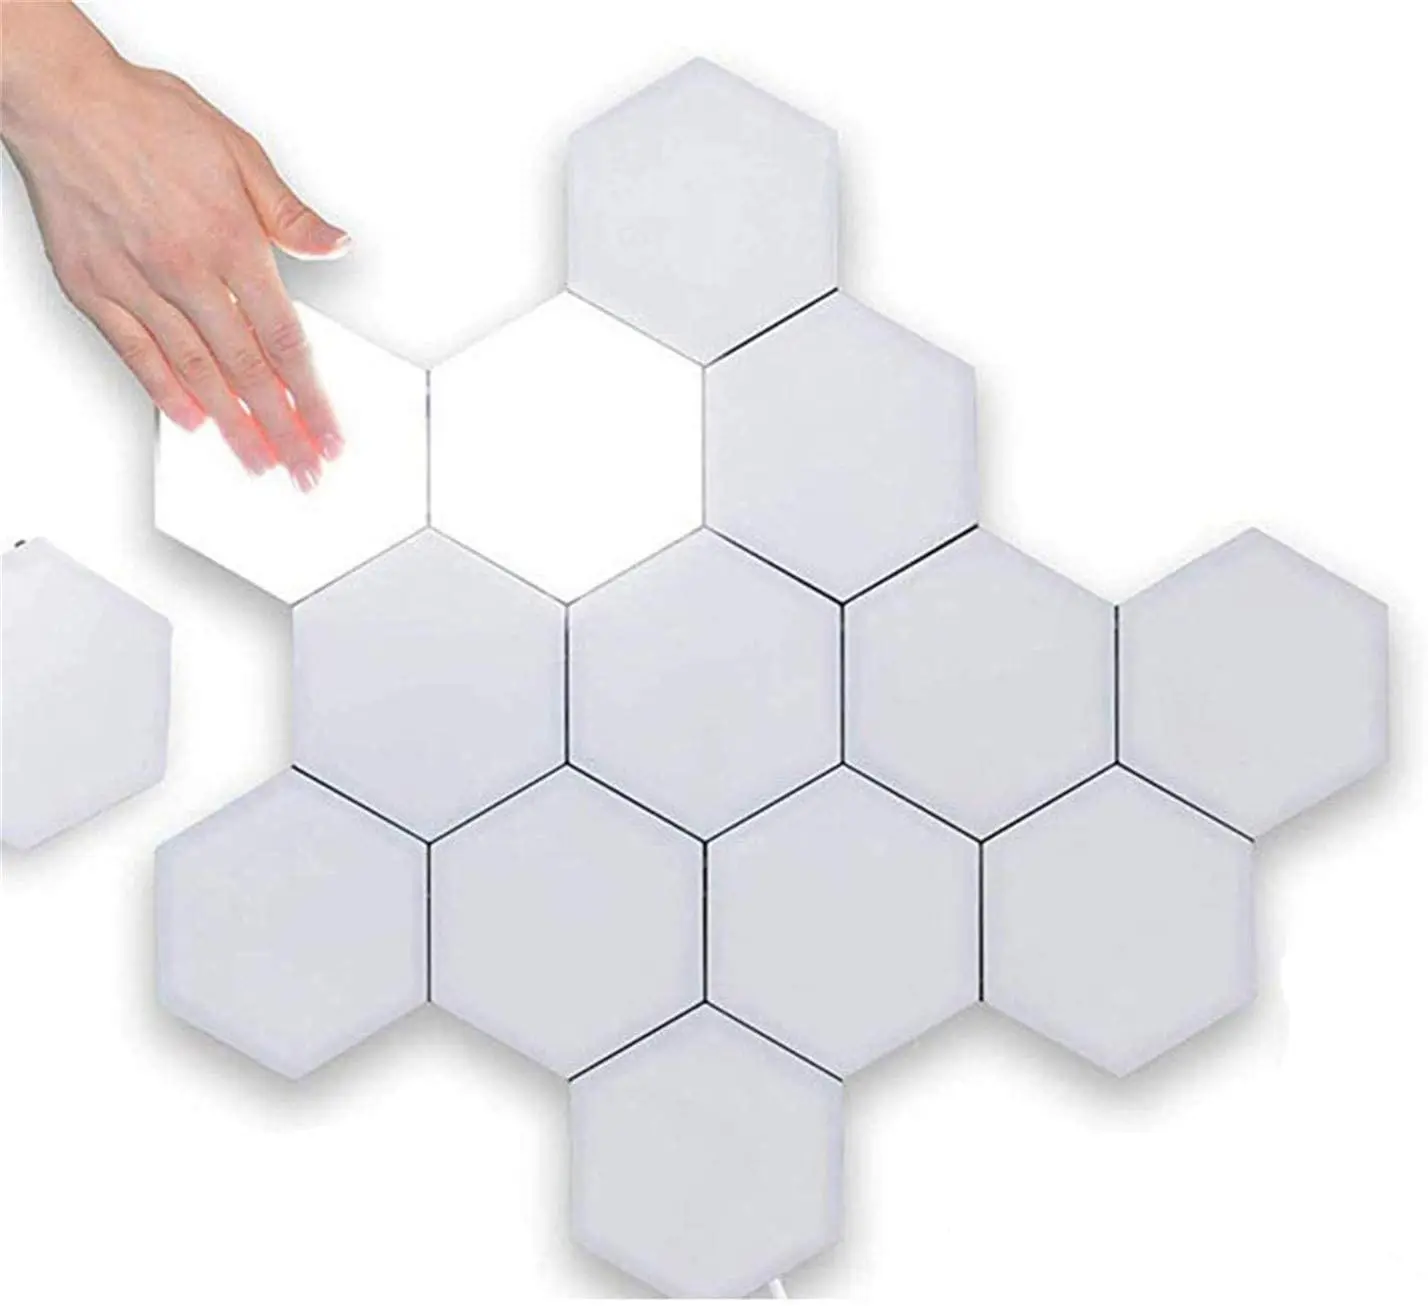 Smart Removable Hexagonal Wall Lamp Touch Geometry Splicing Hex Honeycomb White LED Night Light